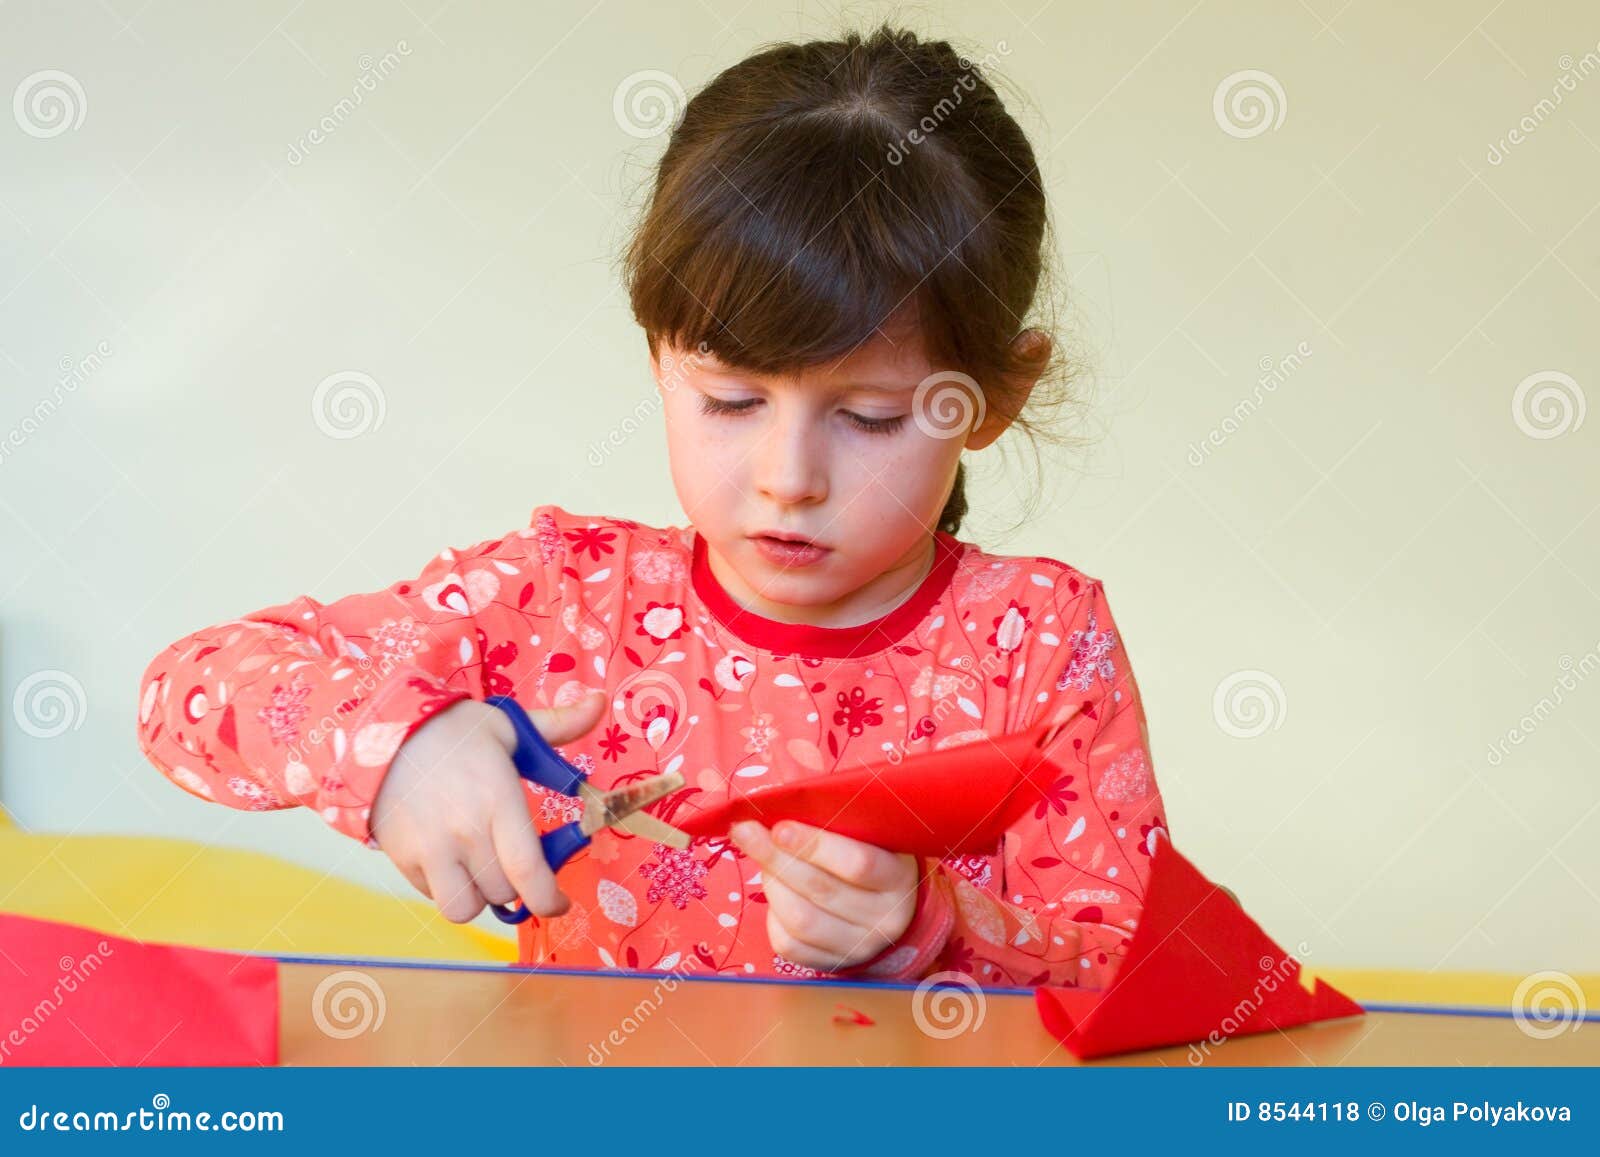 Girl Cutting  Paper  Royalty Free Stock Photos Image 8544118